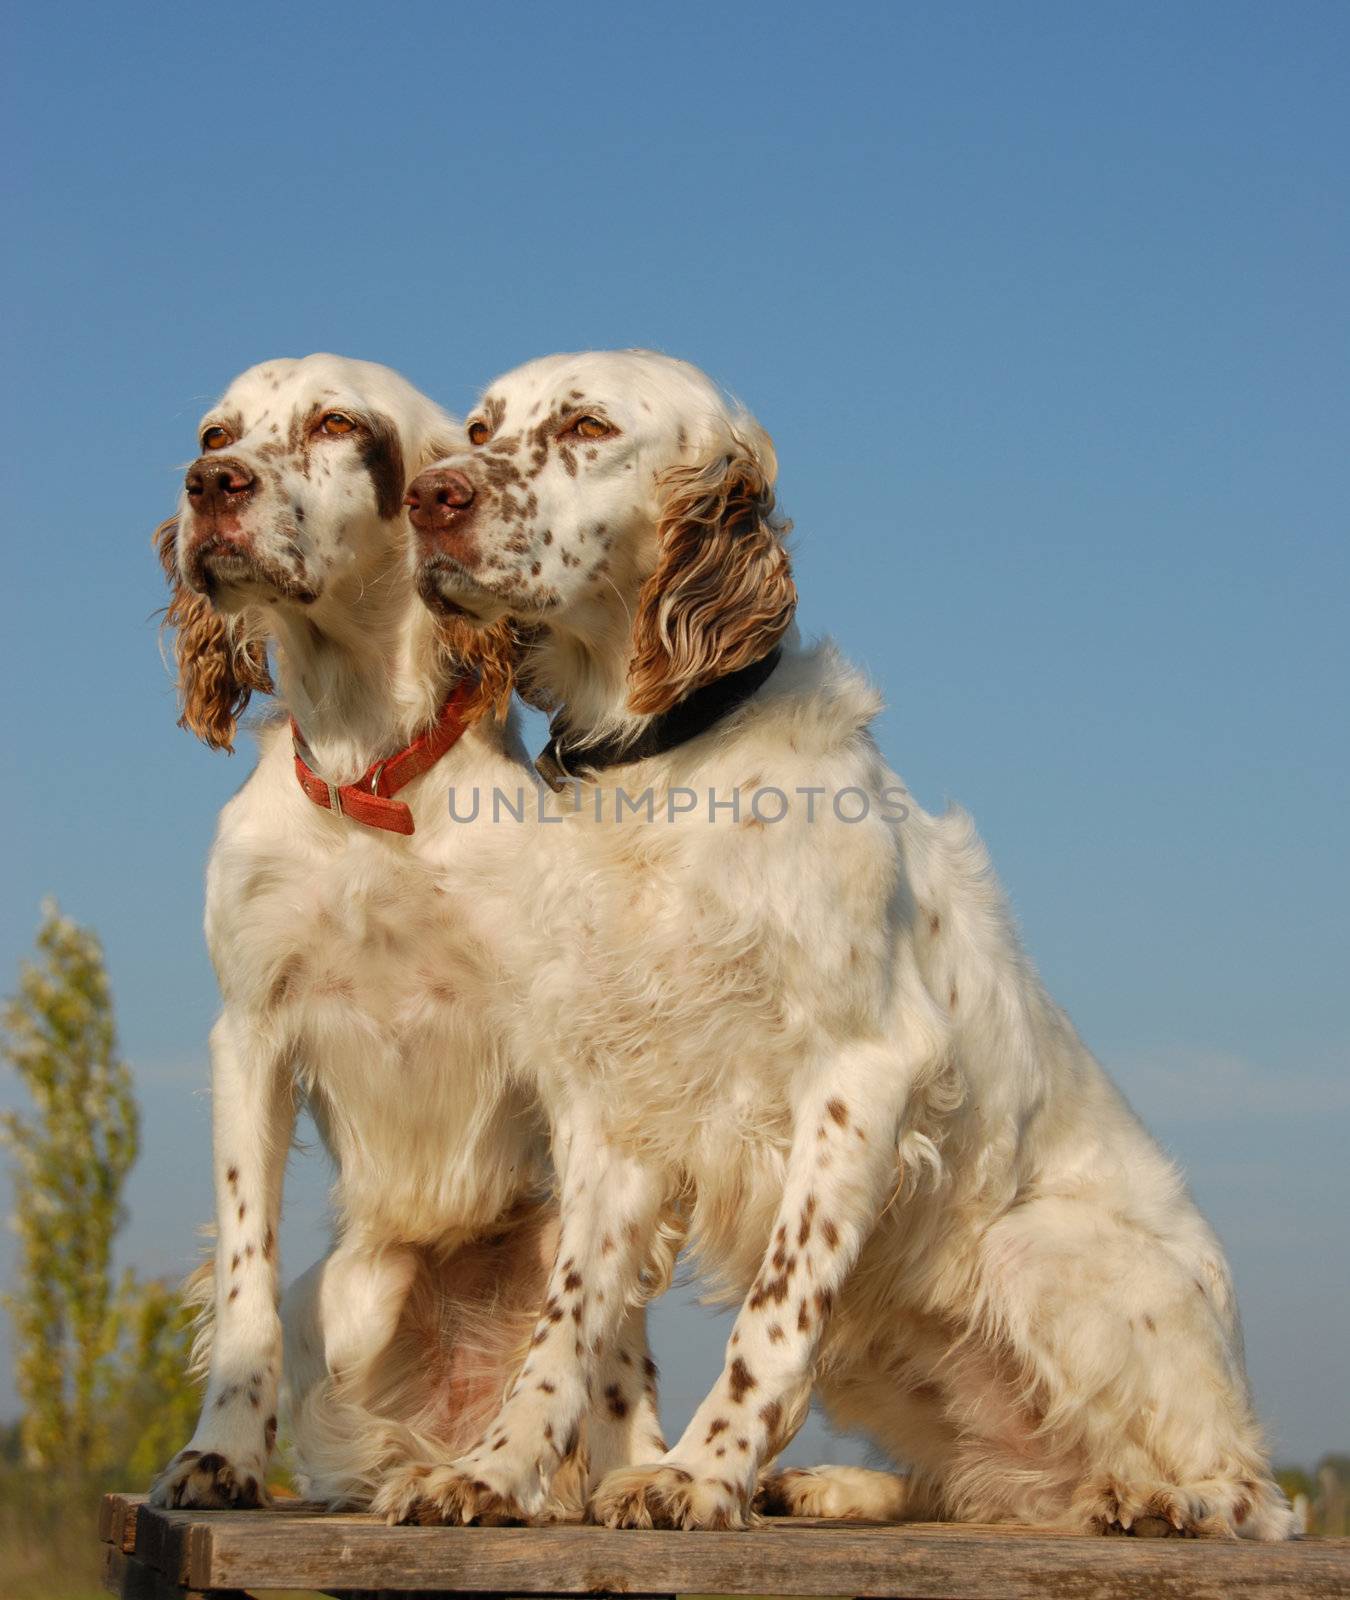 beautiful couple of purebred english setters: hunting dogs

